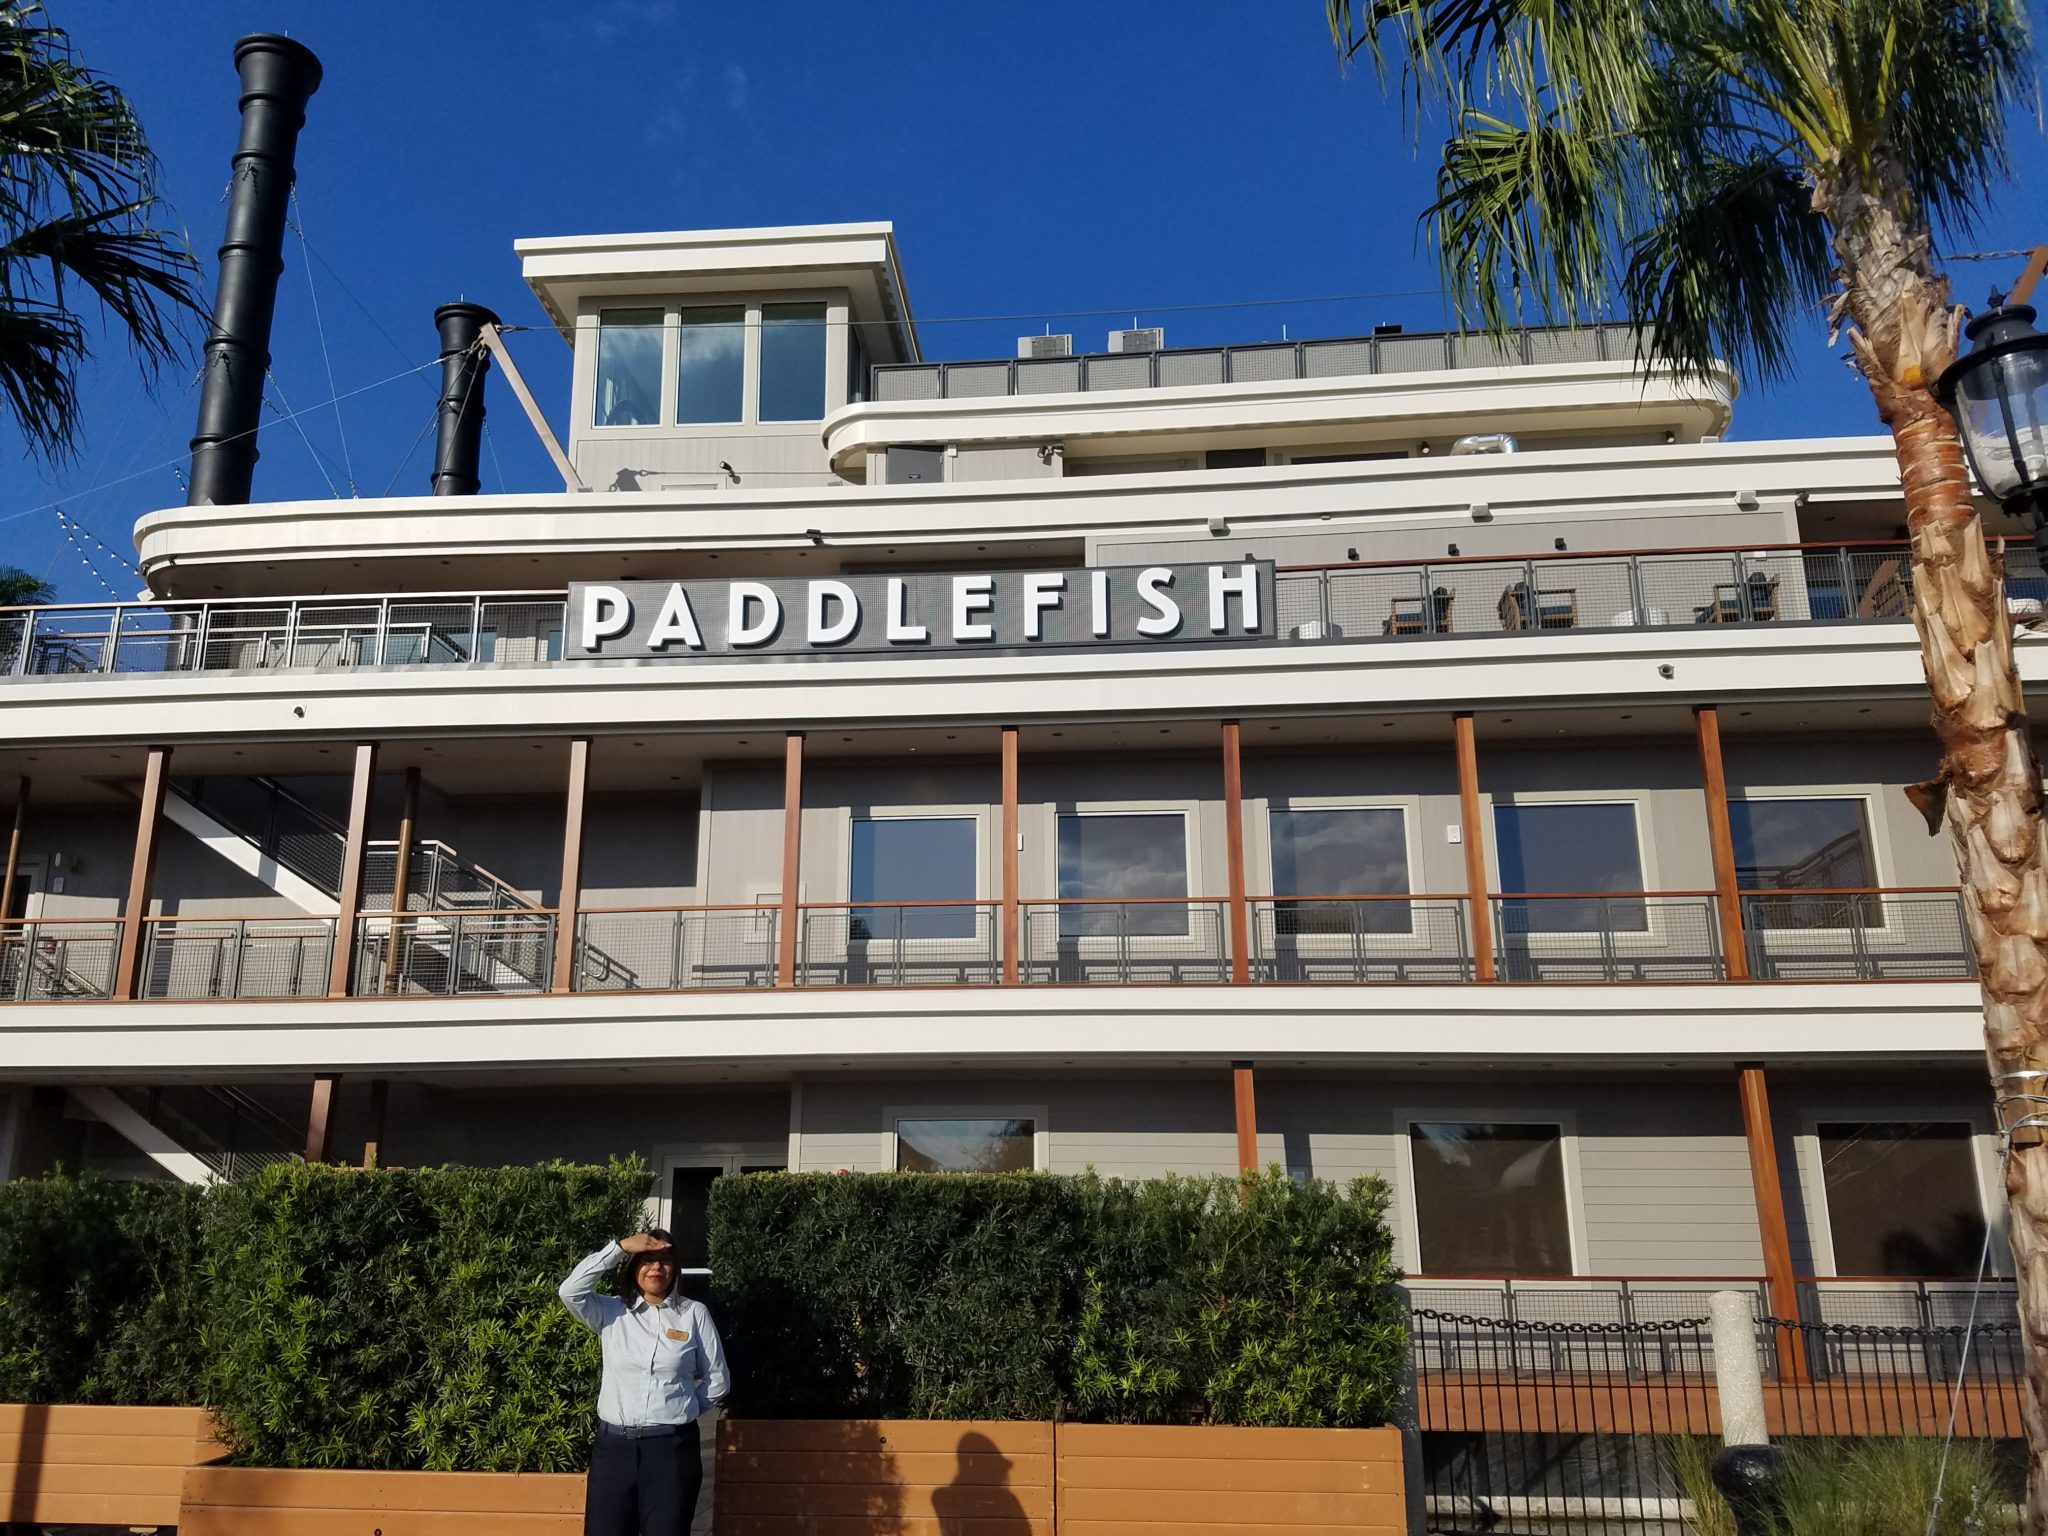 You Can Now Make Dining Reservations for Paddlefish